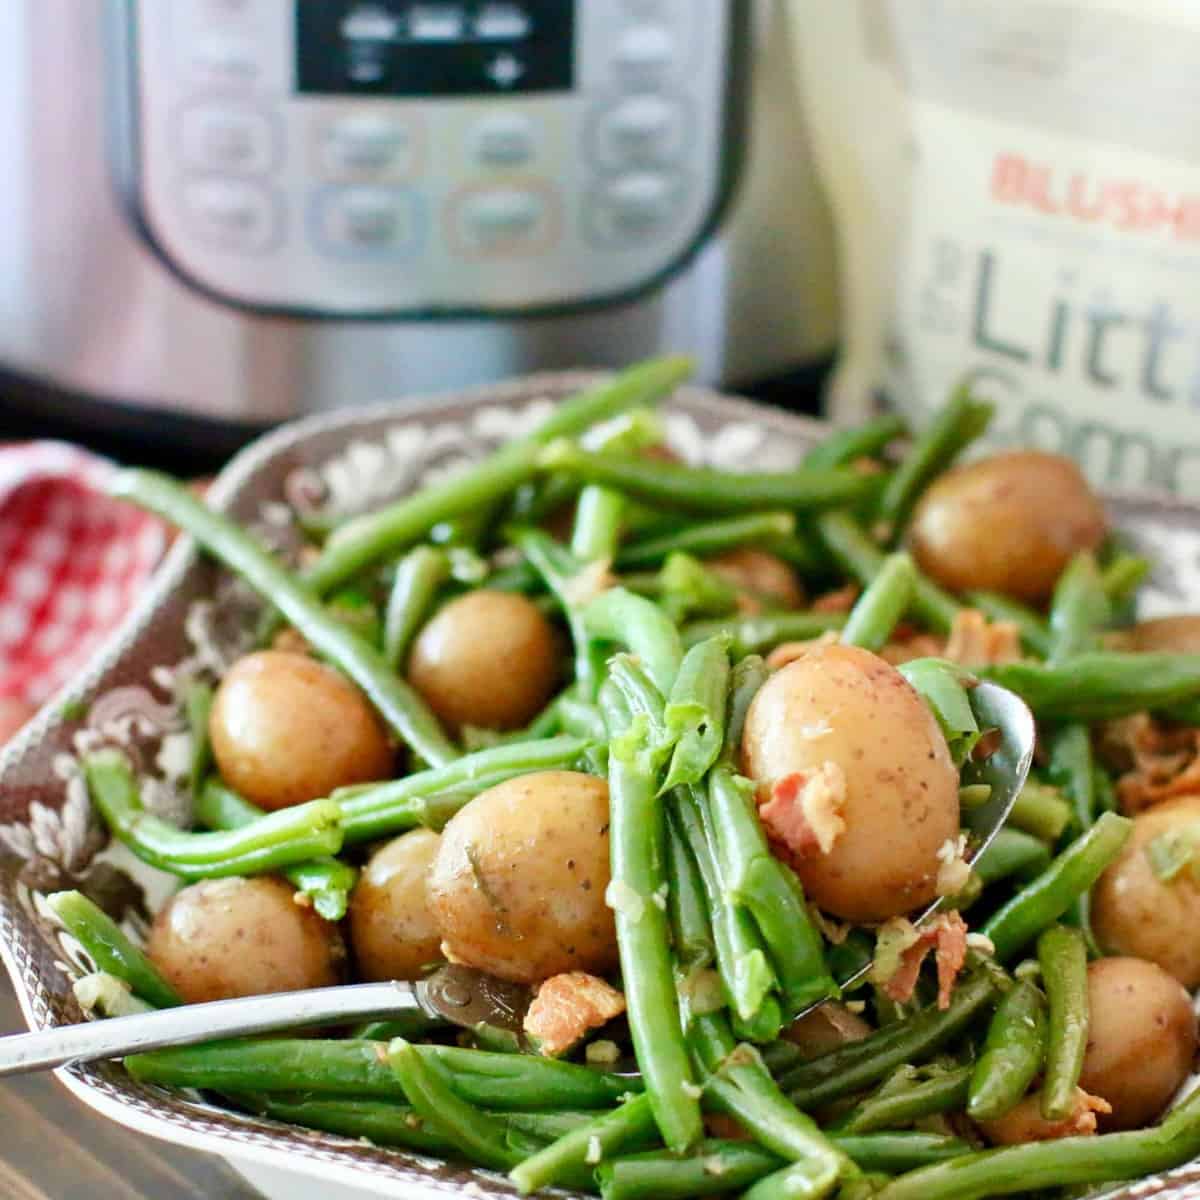 Instant Pot Green Beans and Potatoes